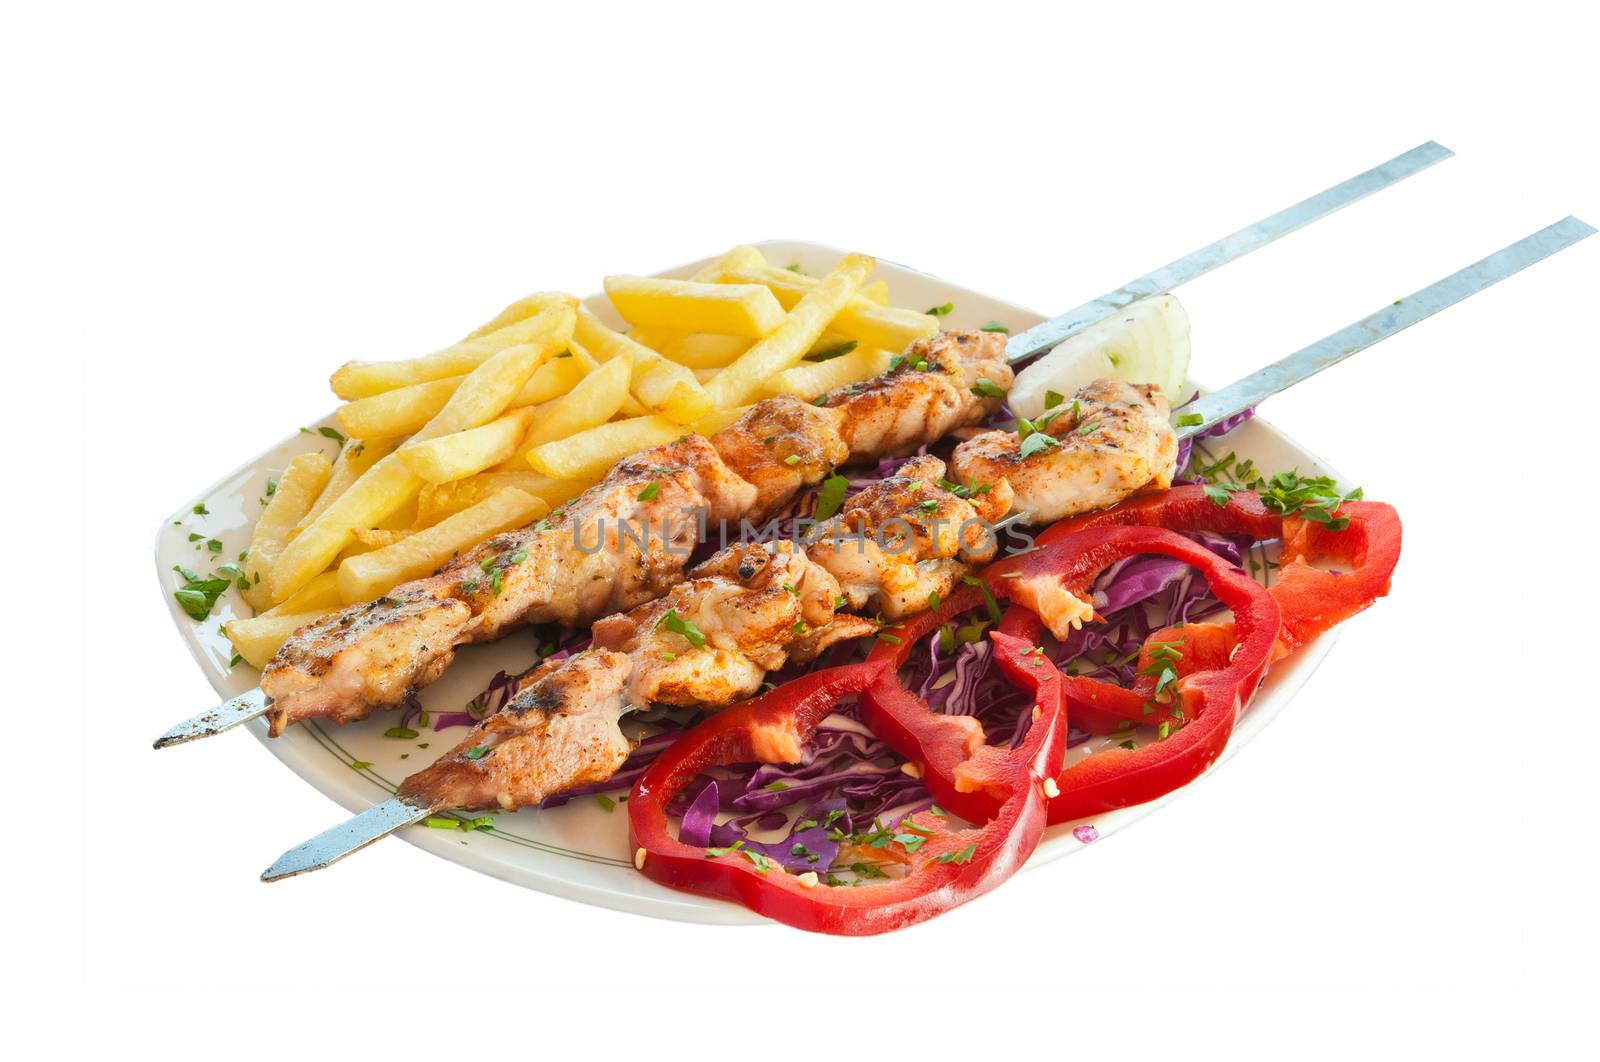 shish kebab on skewers with chips by ben44